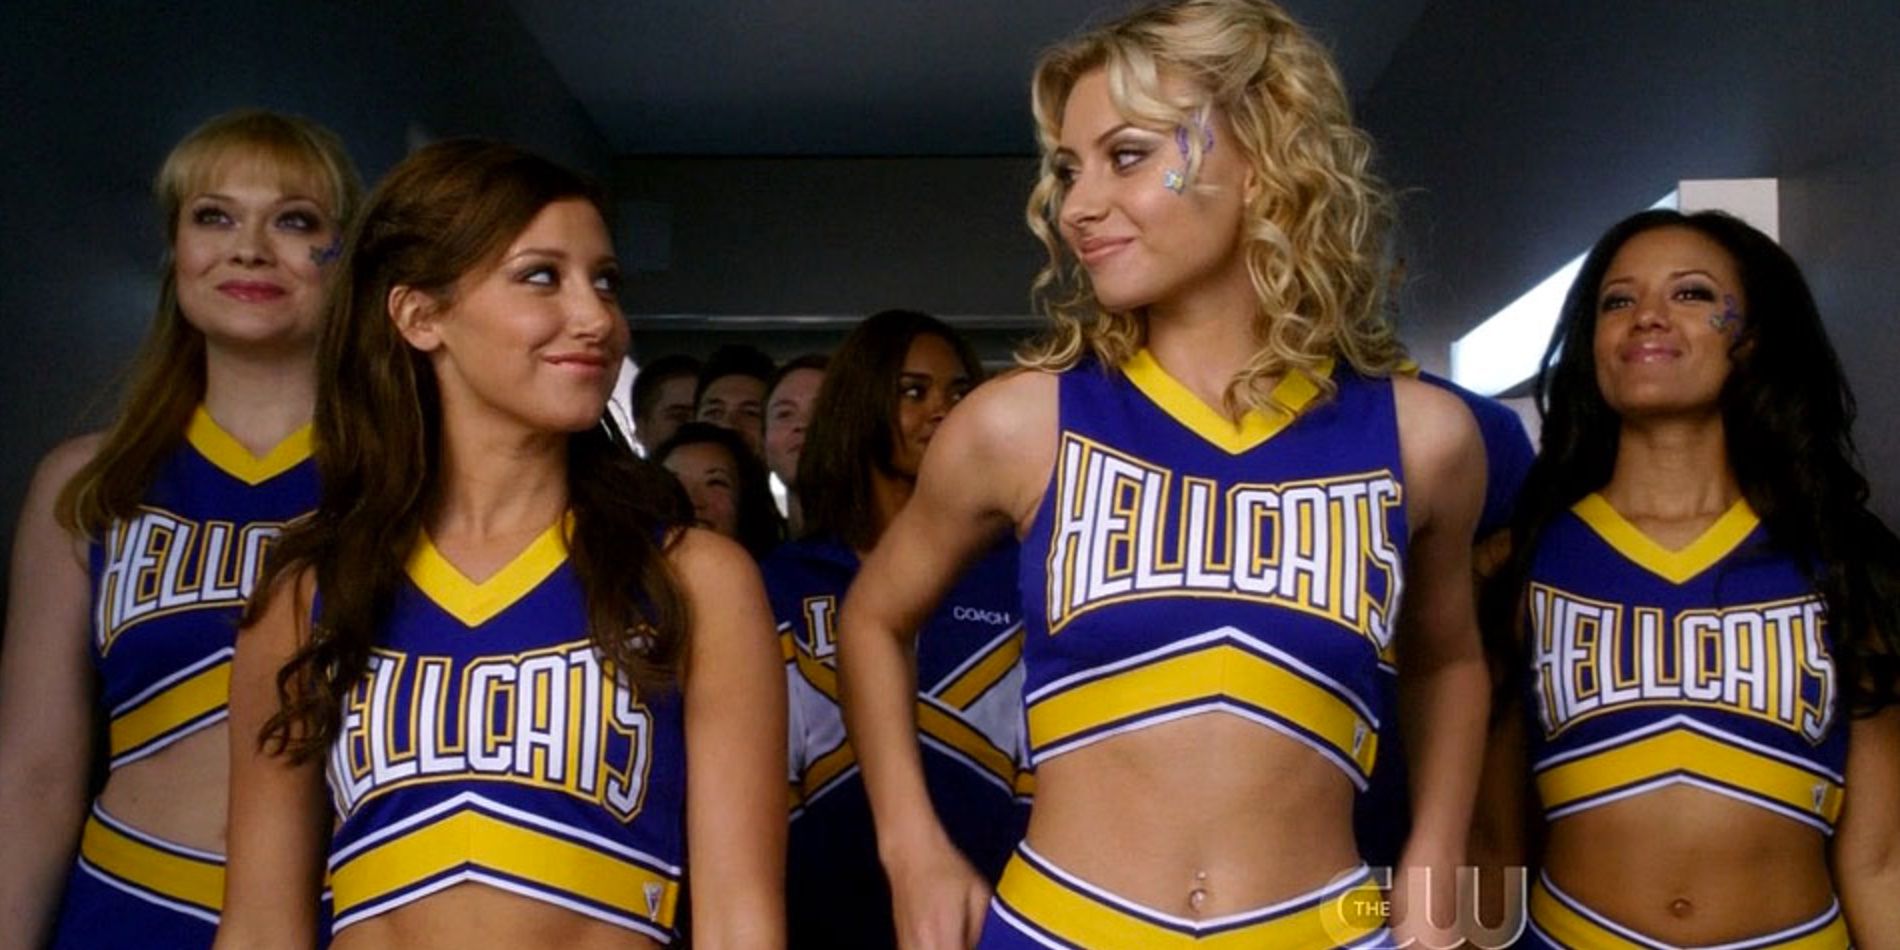 Ashley Tisdale and Alyson Michalka in Hellcats